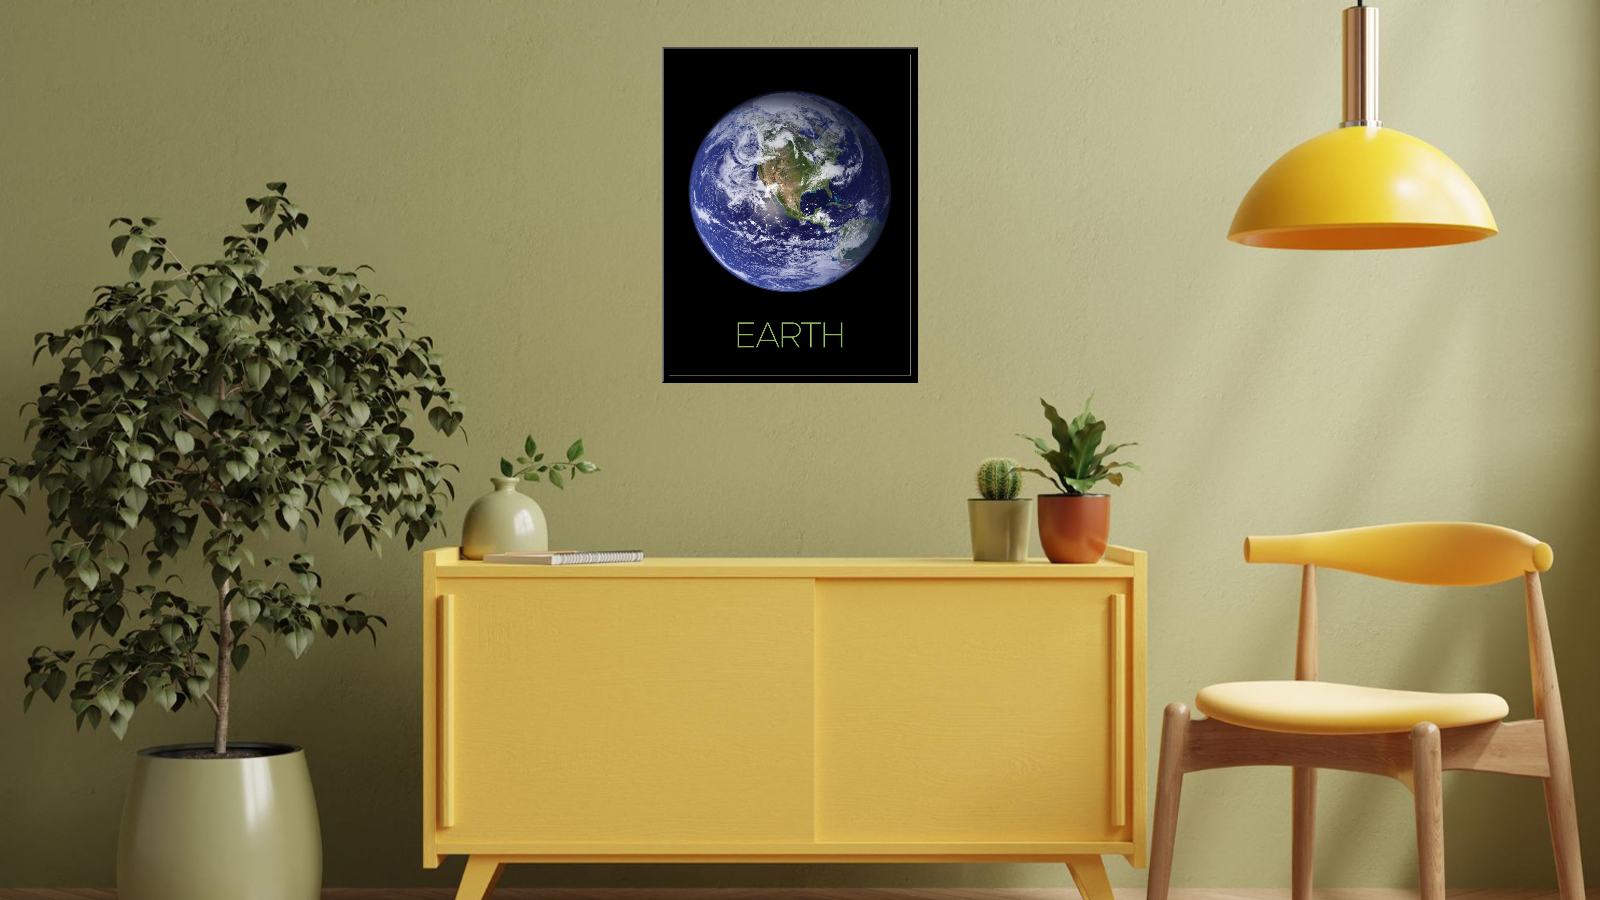 Earth - natural colors